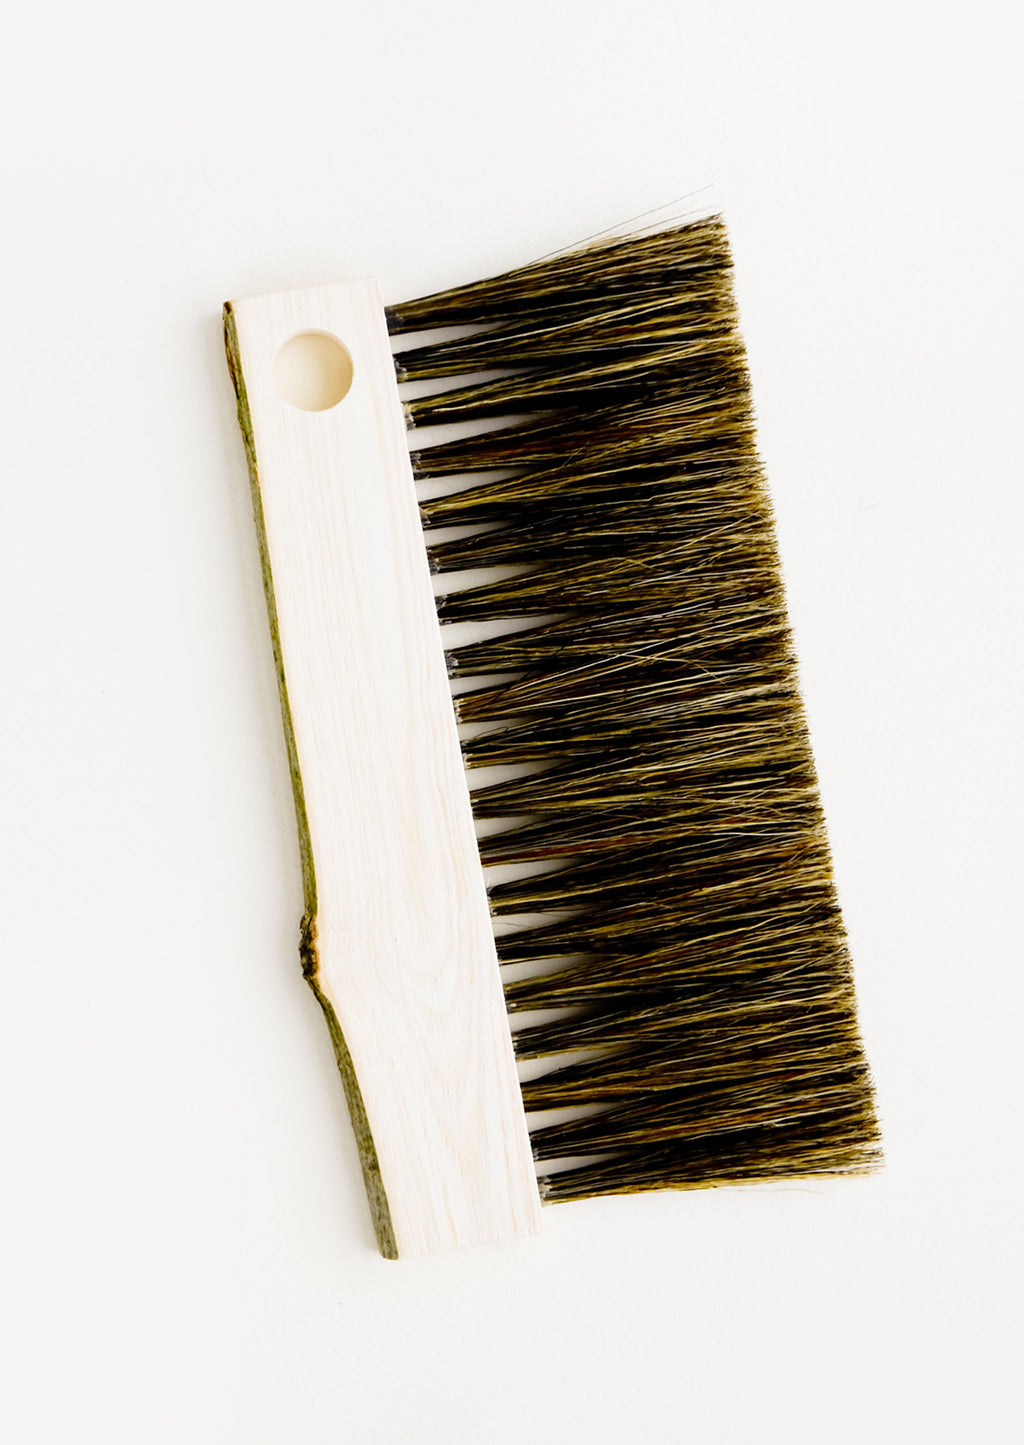 1: Drawing board bristle brush with bark-edged wooden handle and circular cutout for hanging